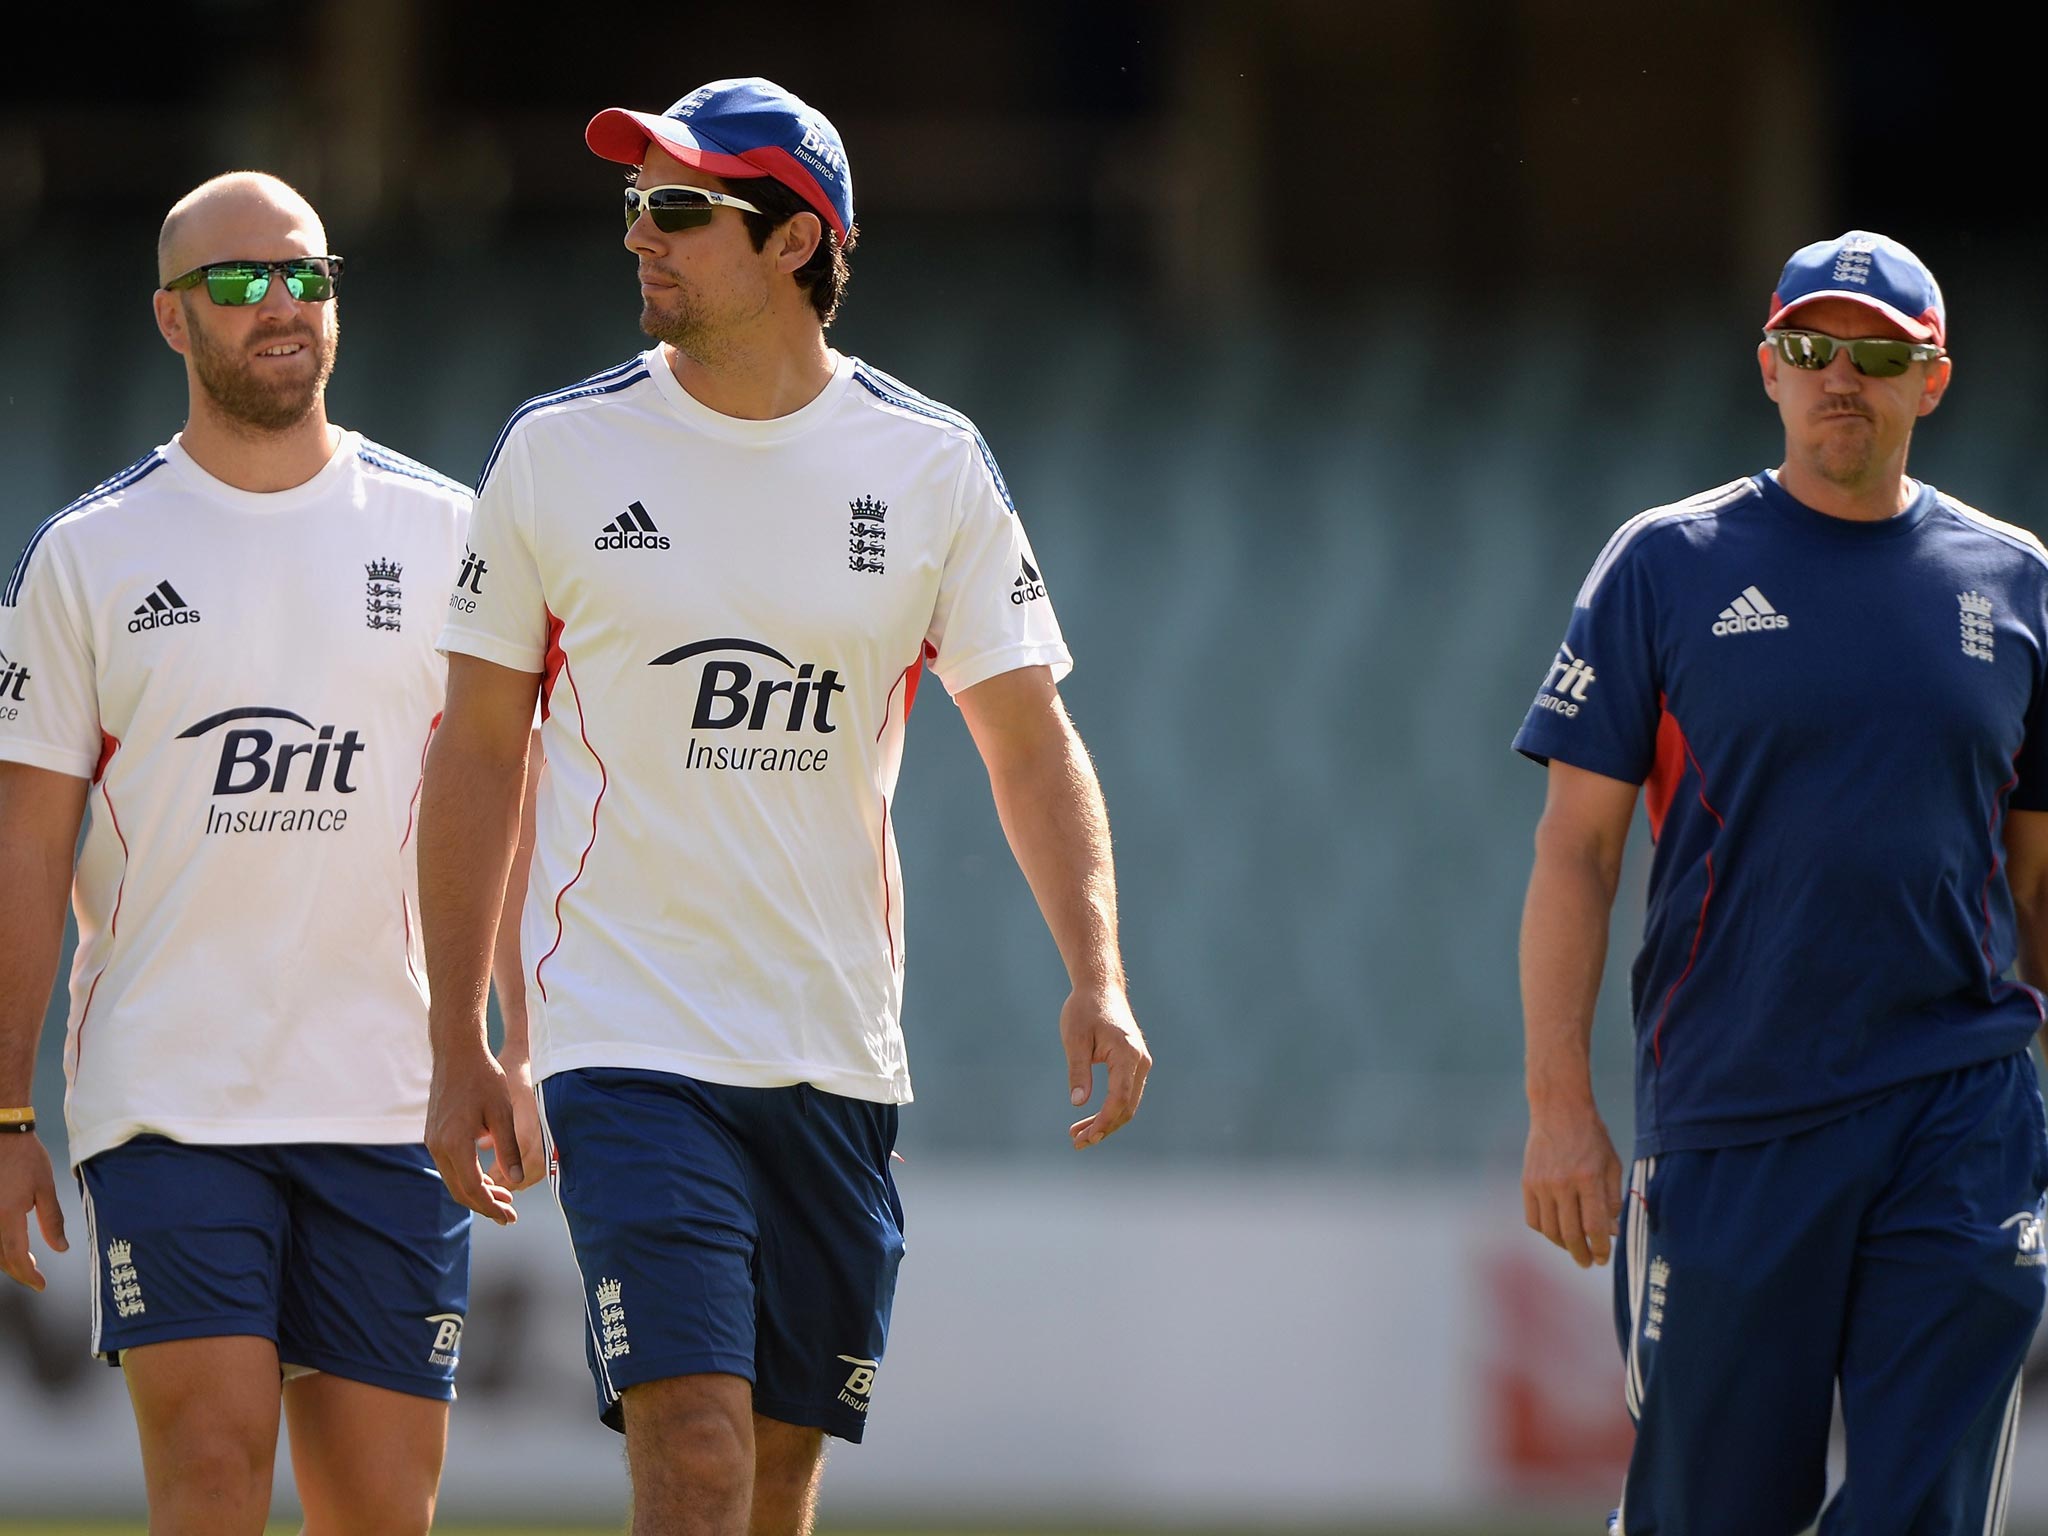 Matt Prior (left) was vice-captain to Alastair Cook in Australia last winter but was dropped during the Ashes series